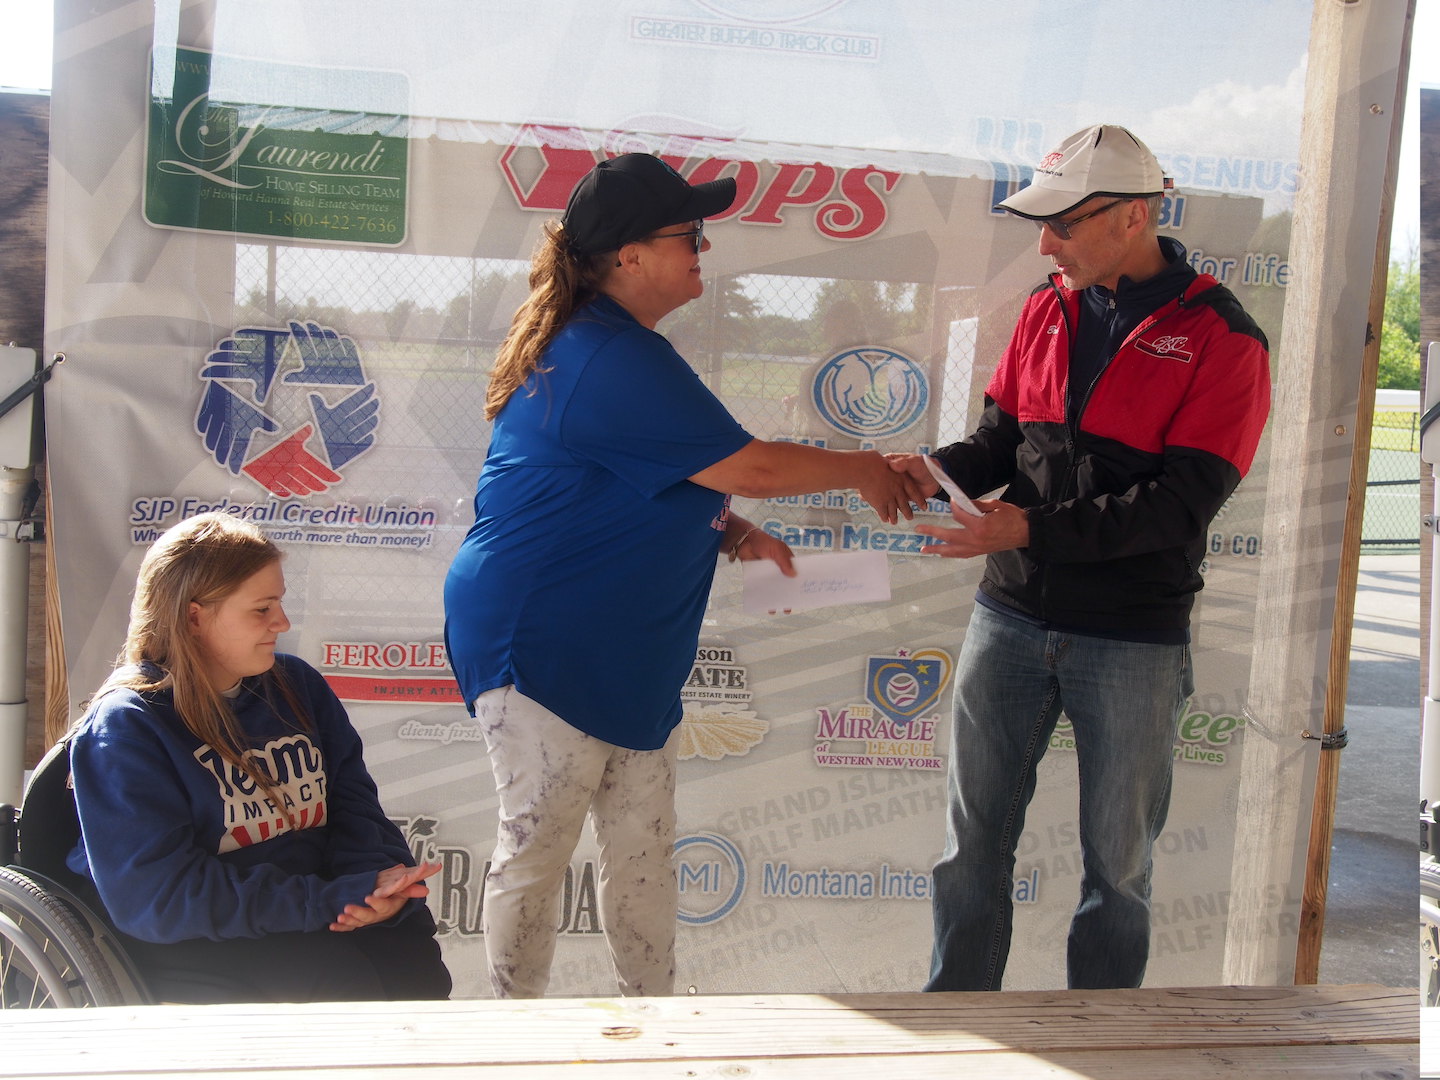 Brian McElroy, race director for the Grand Island Half Marathon, presents a donation of $5,000 to Coach Gale of the Miracle League of Western New York as a player looks on.